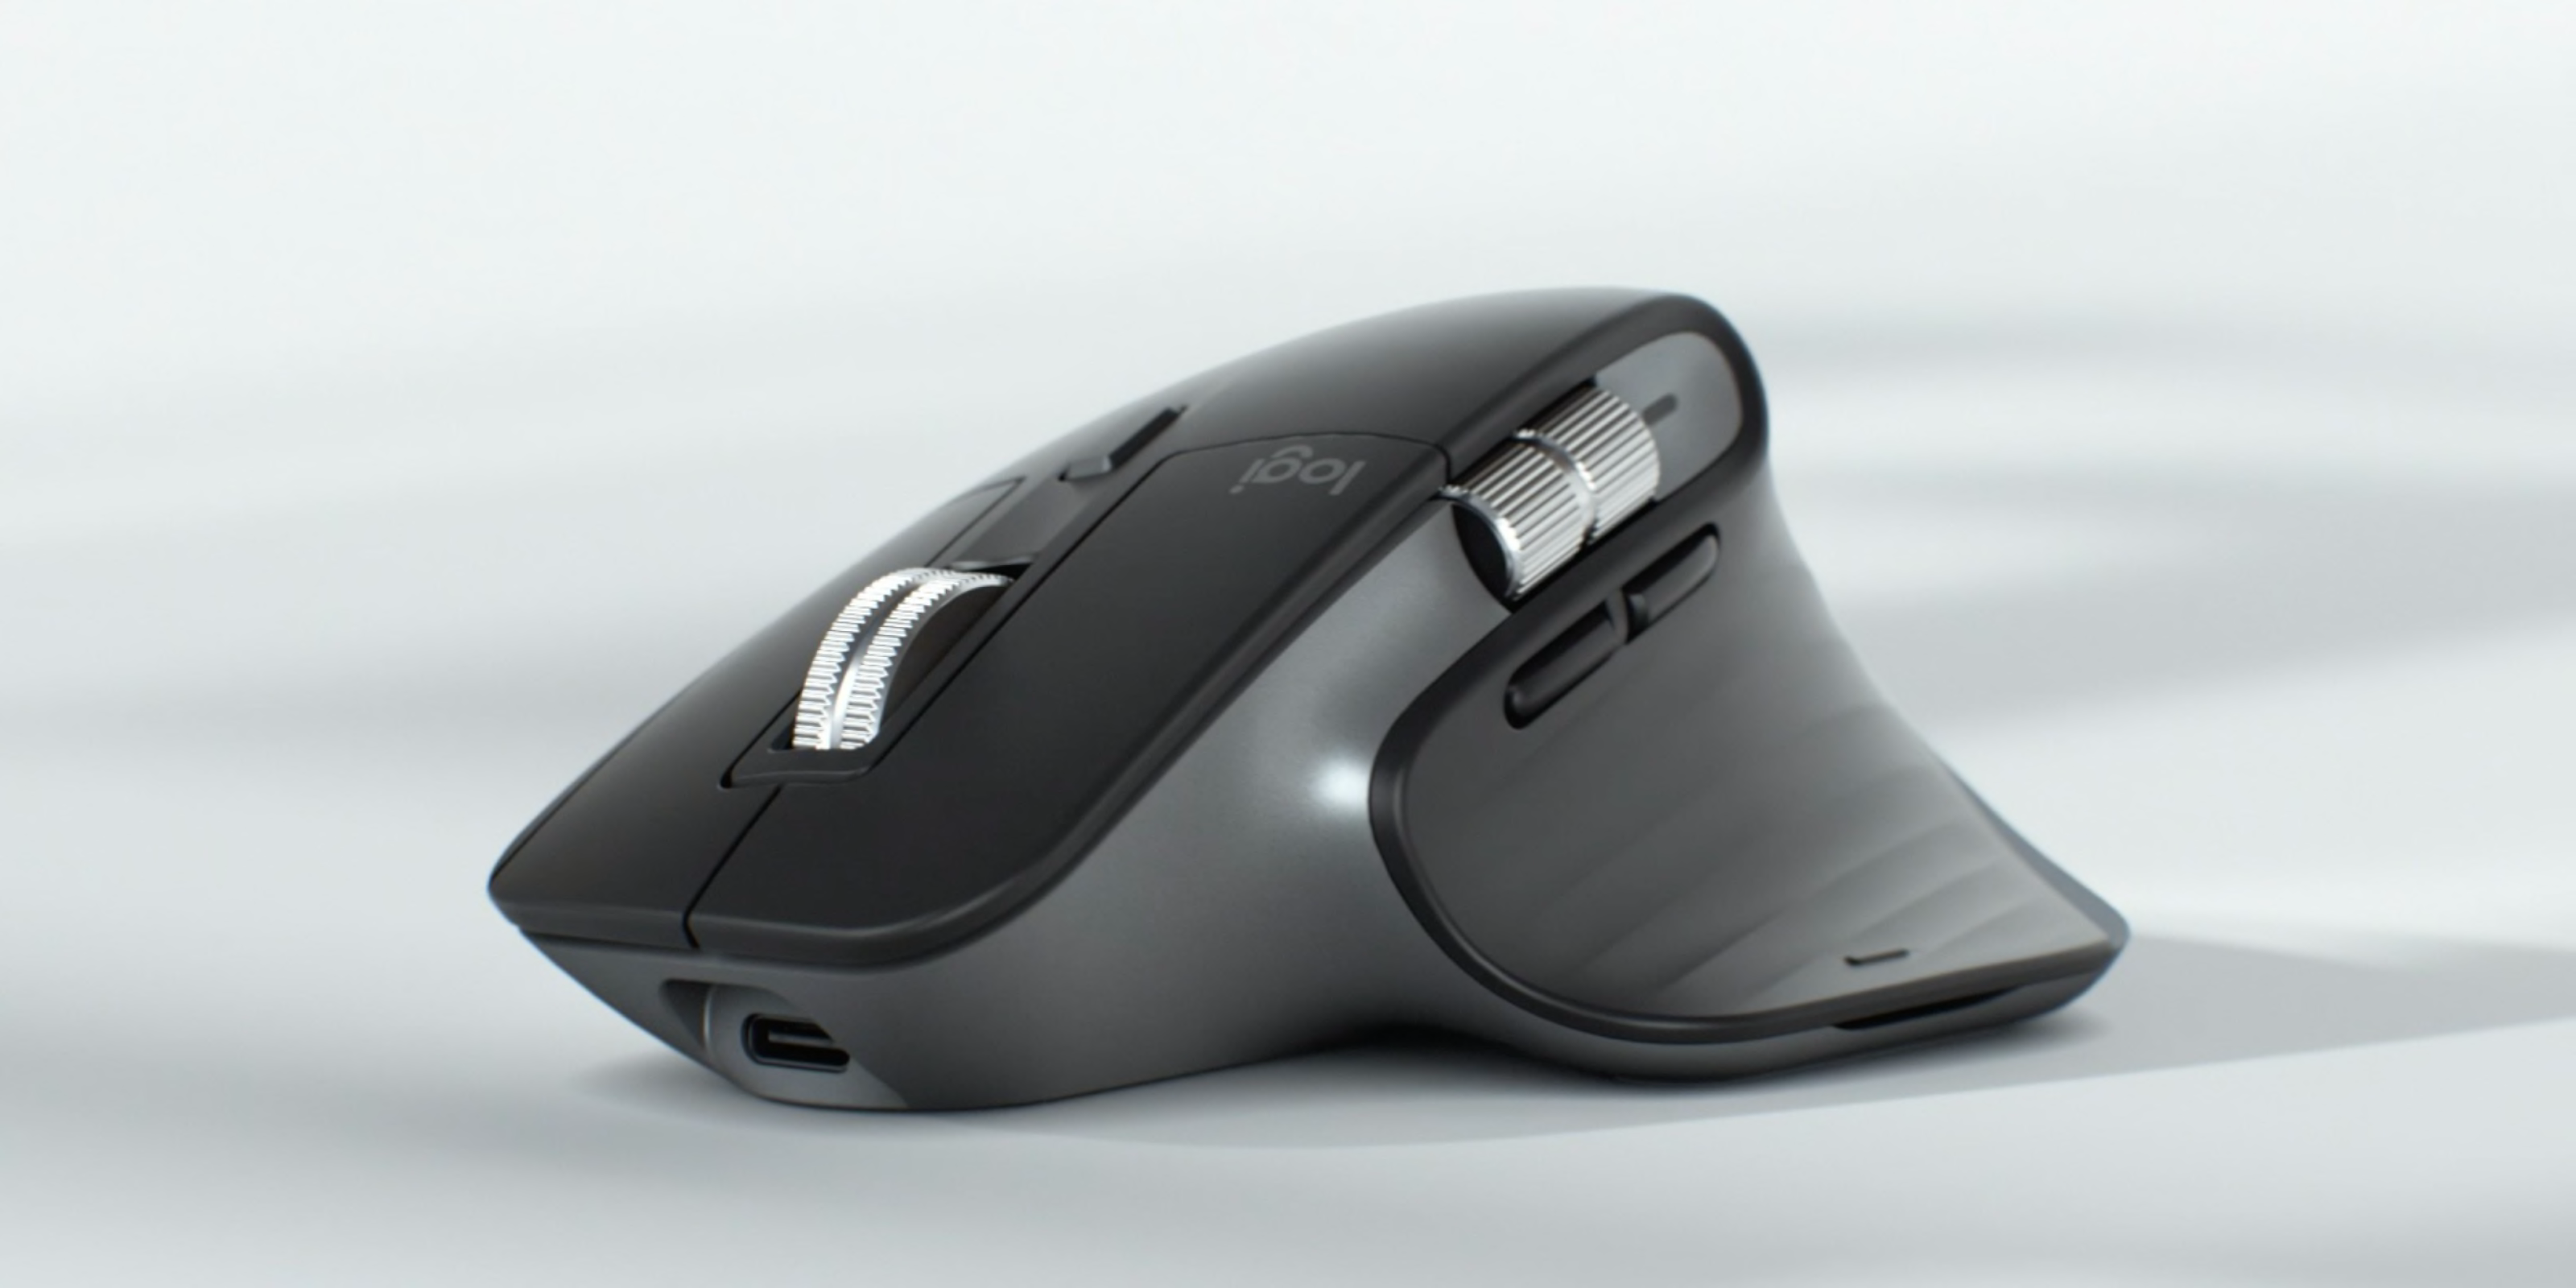 MX Master 3S Wireless Bluetooth Mouse for Mac | Logitech